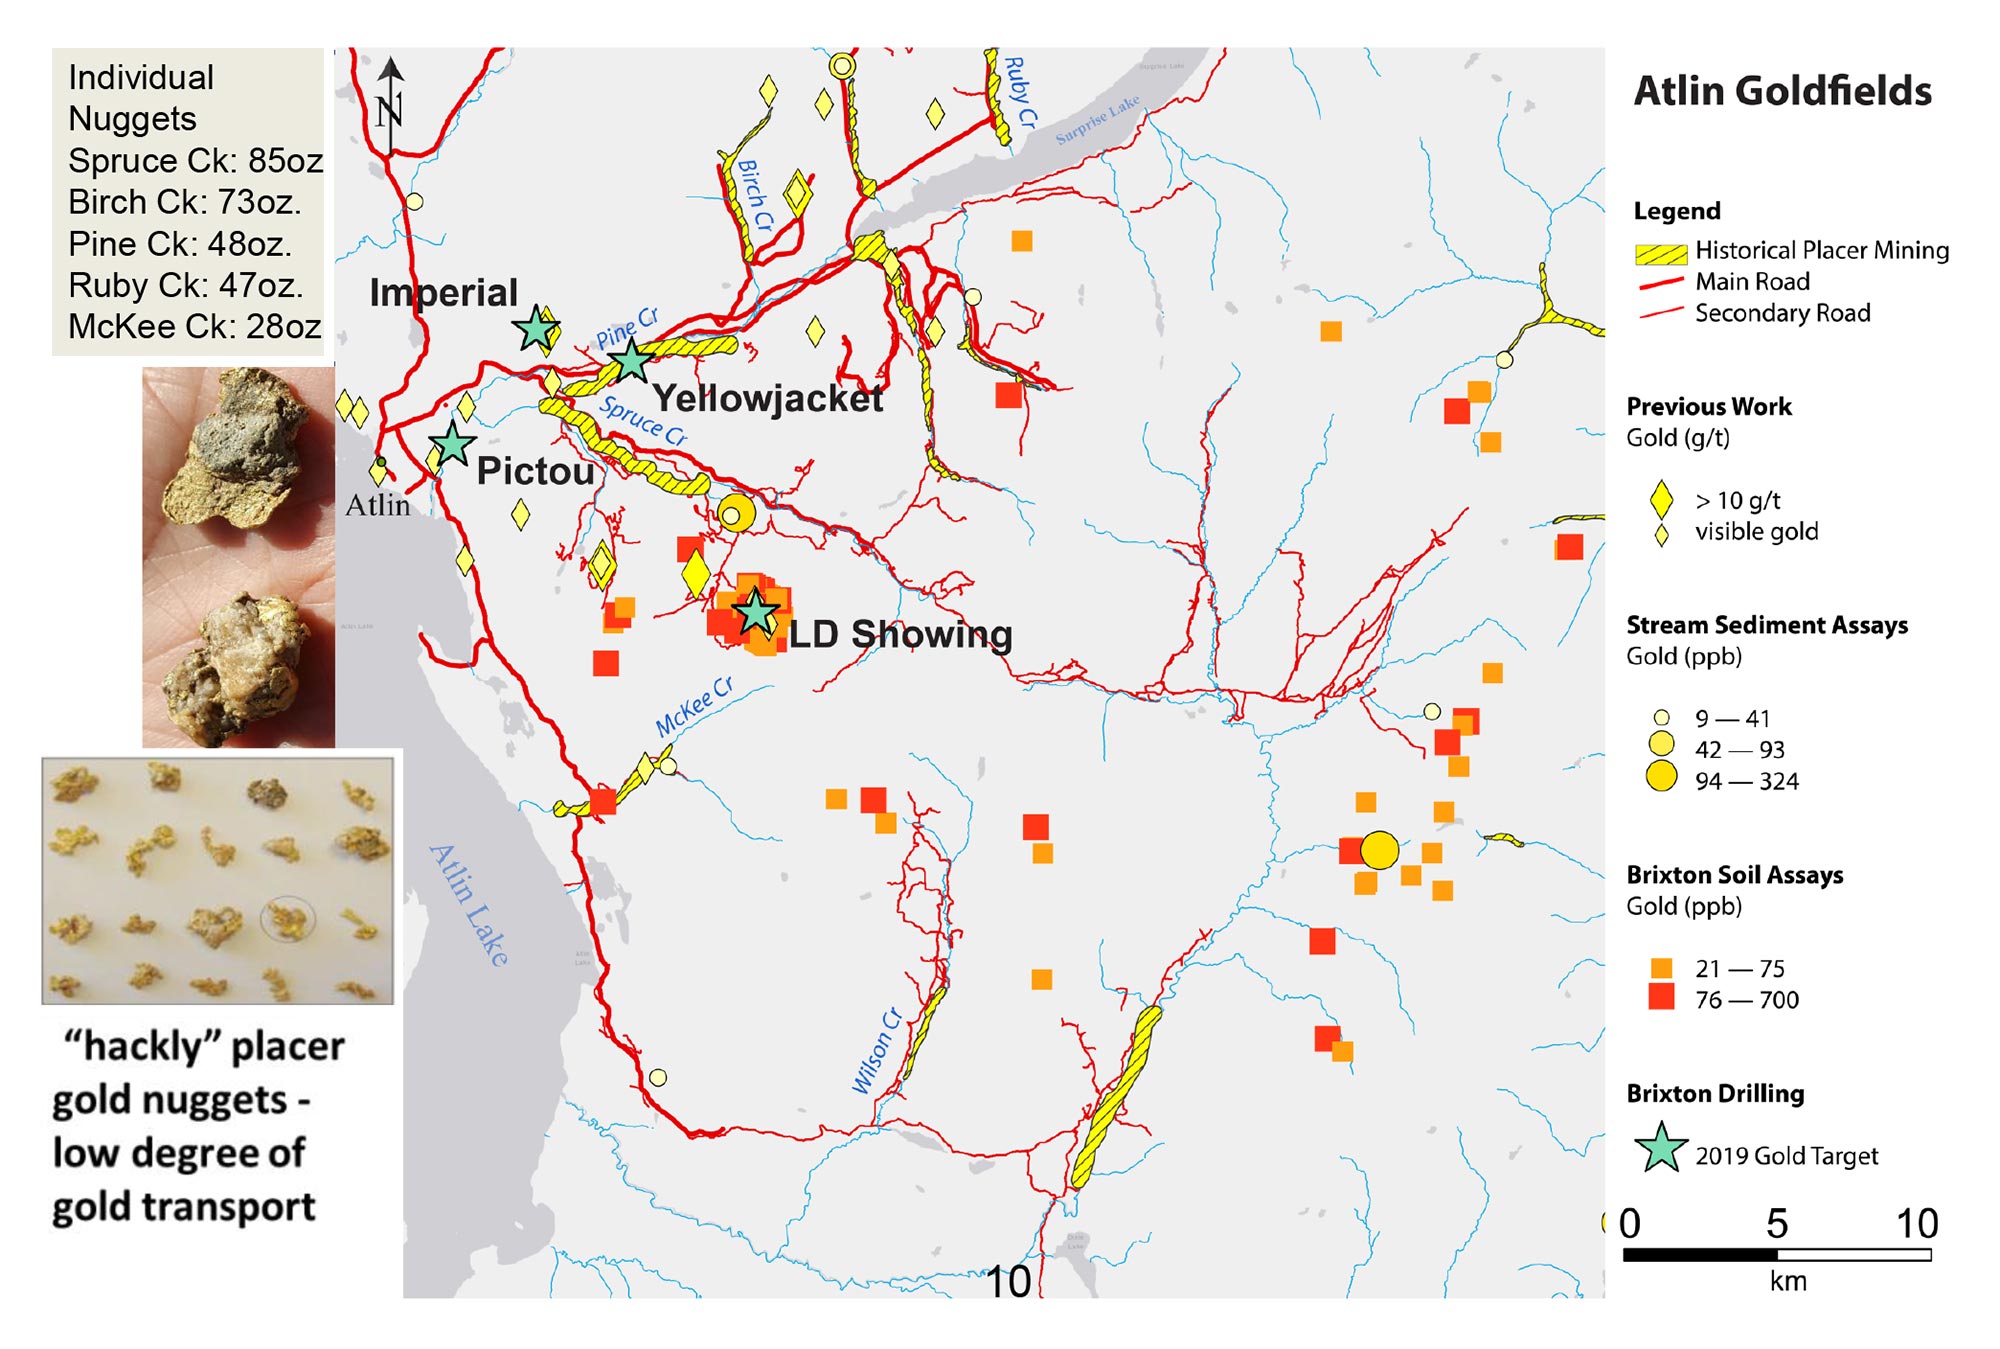 Atlin Goldfields: roads, placer gold nuggets and geochemistry.